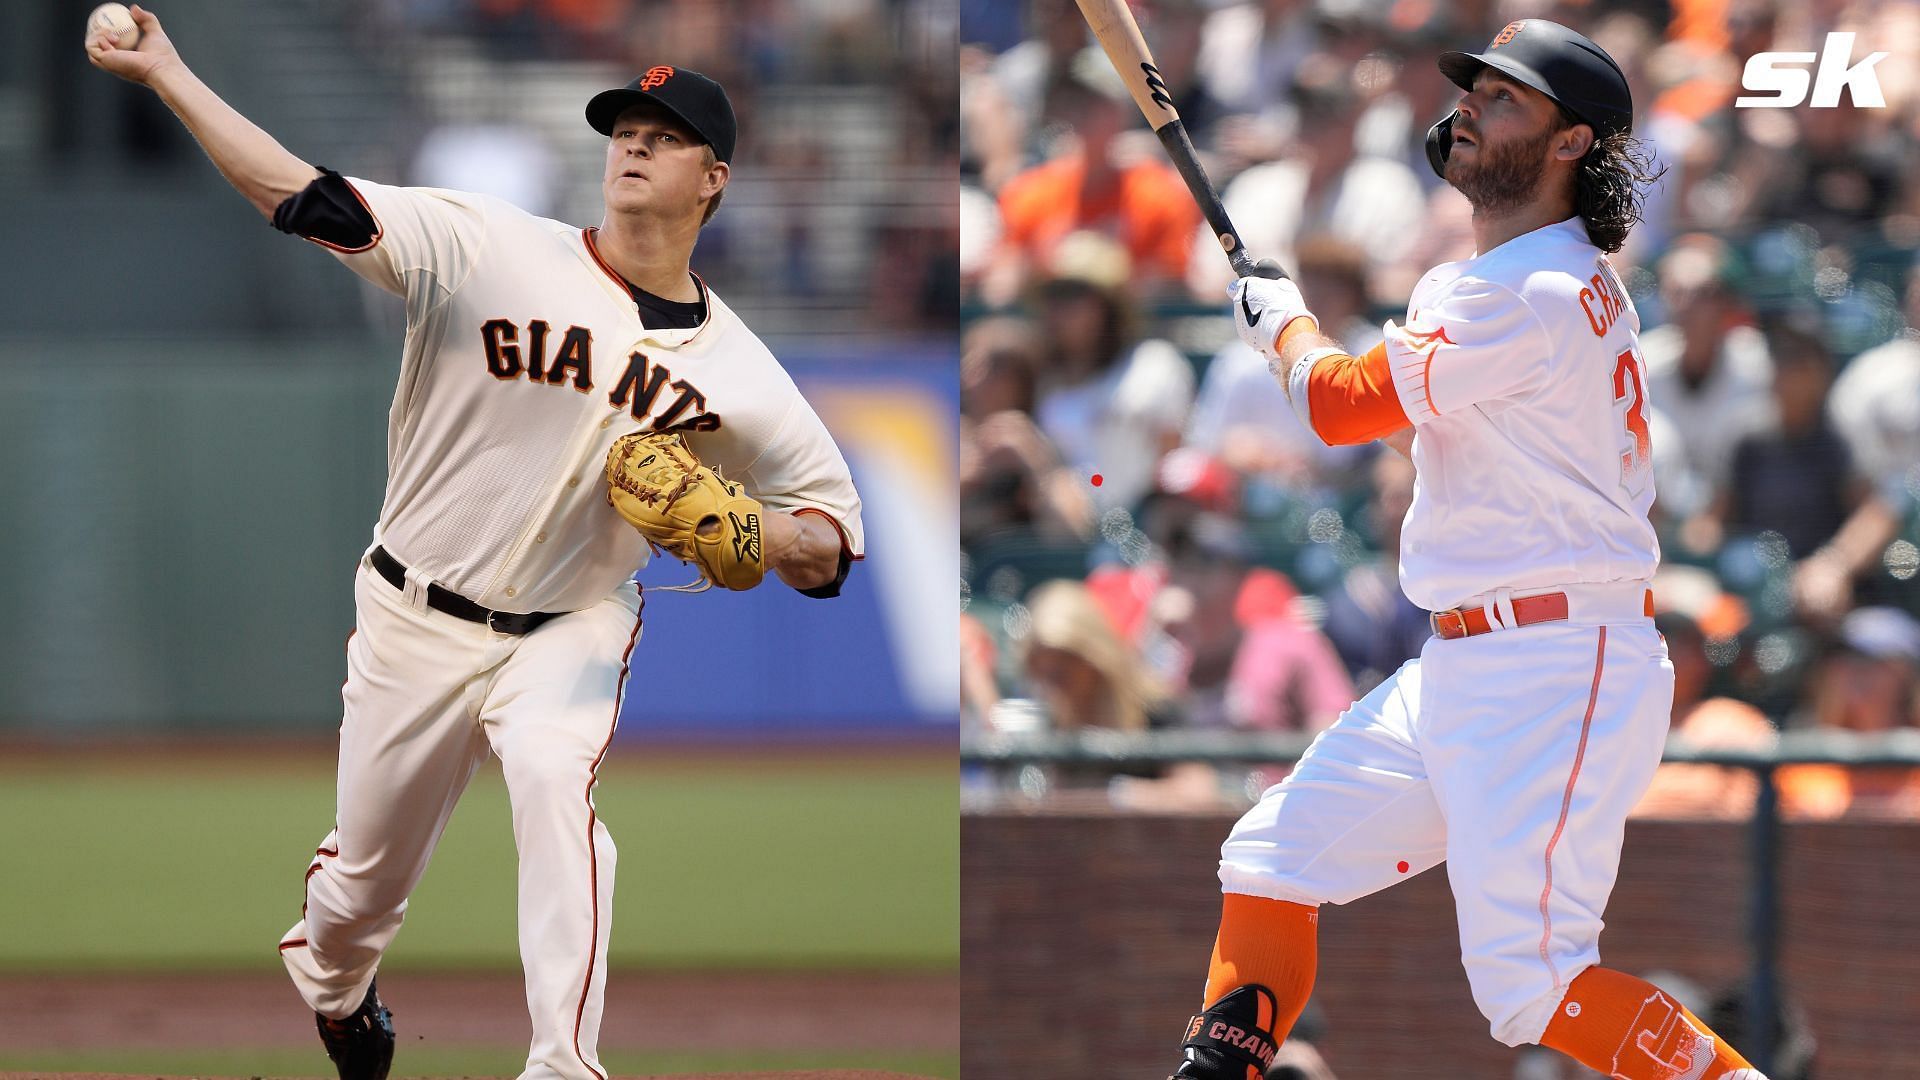 Which San Francisco Giants players never played for other franchises? MLB Immaculate Grid Answers December 2